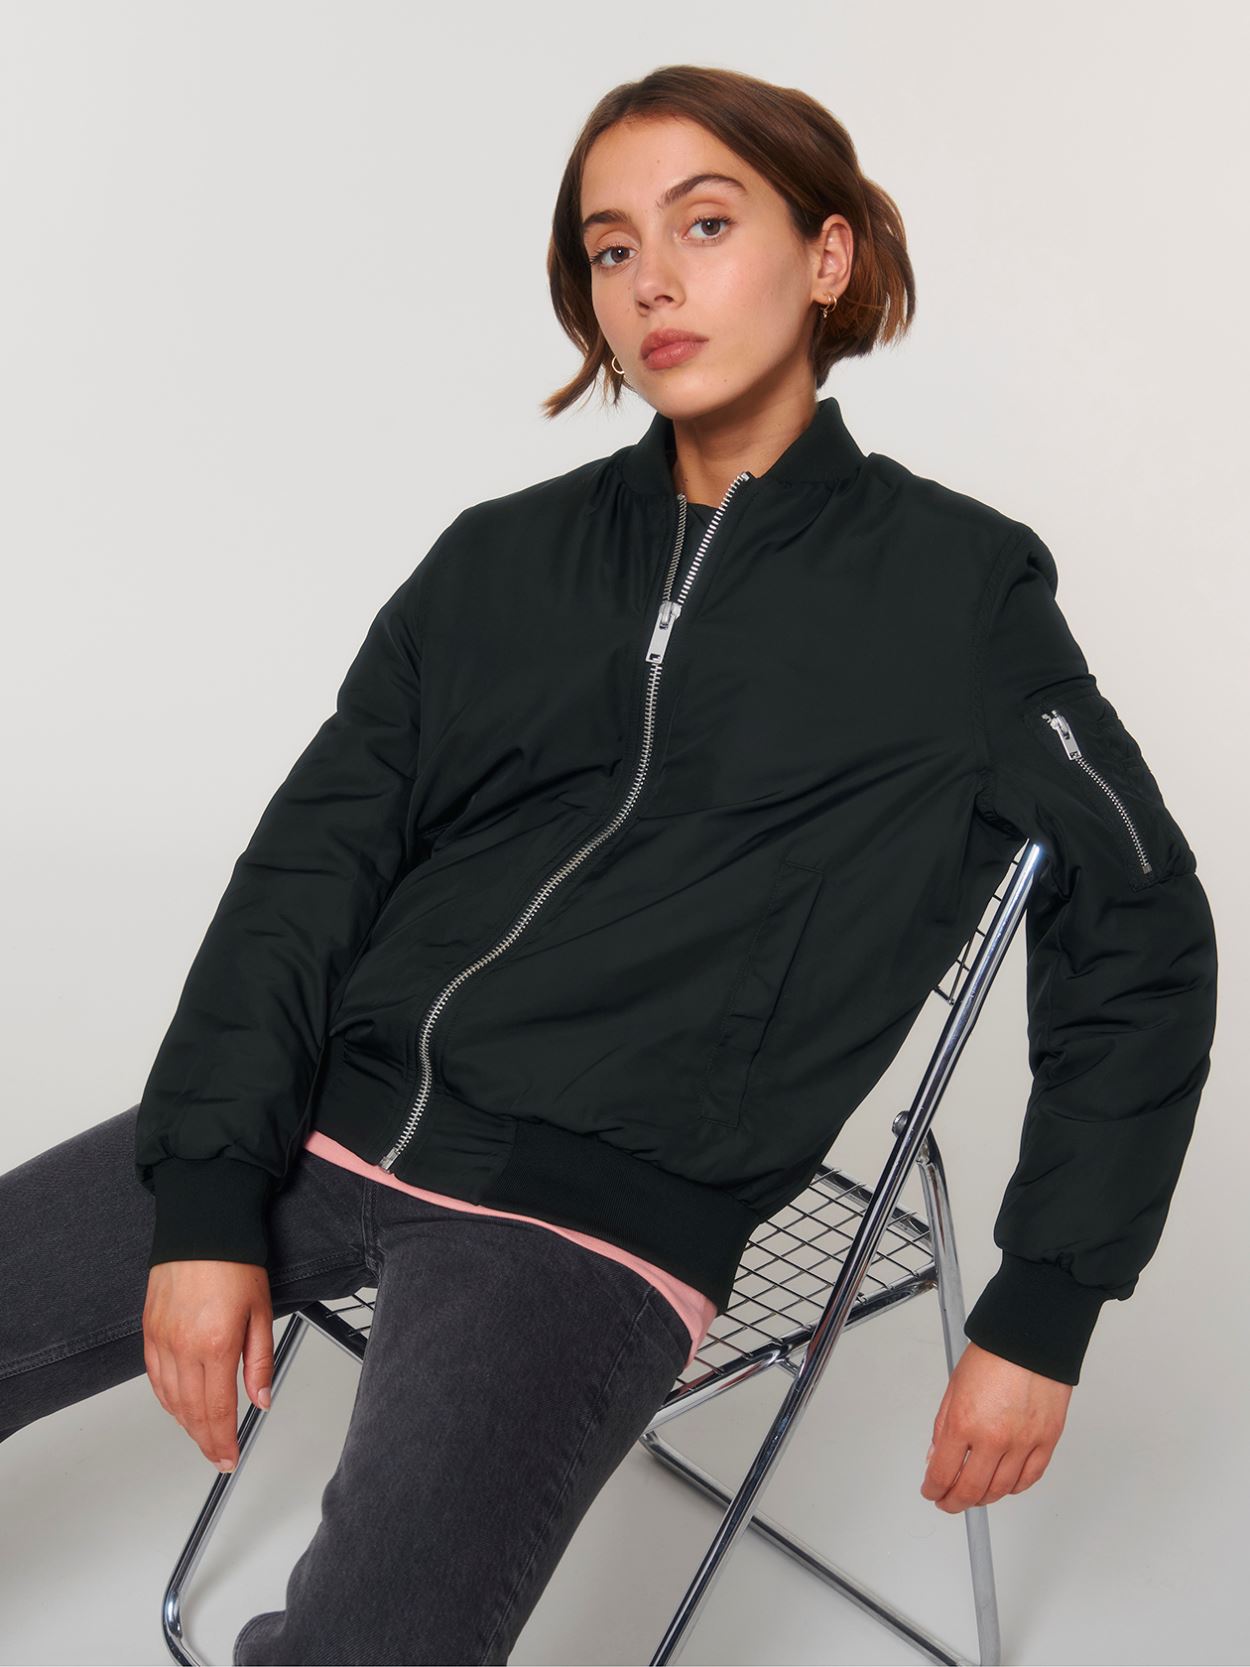 SX178 Bomber Jacket With Metal Details Image 1